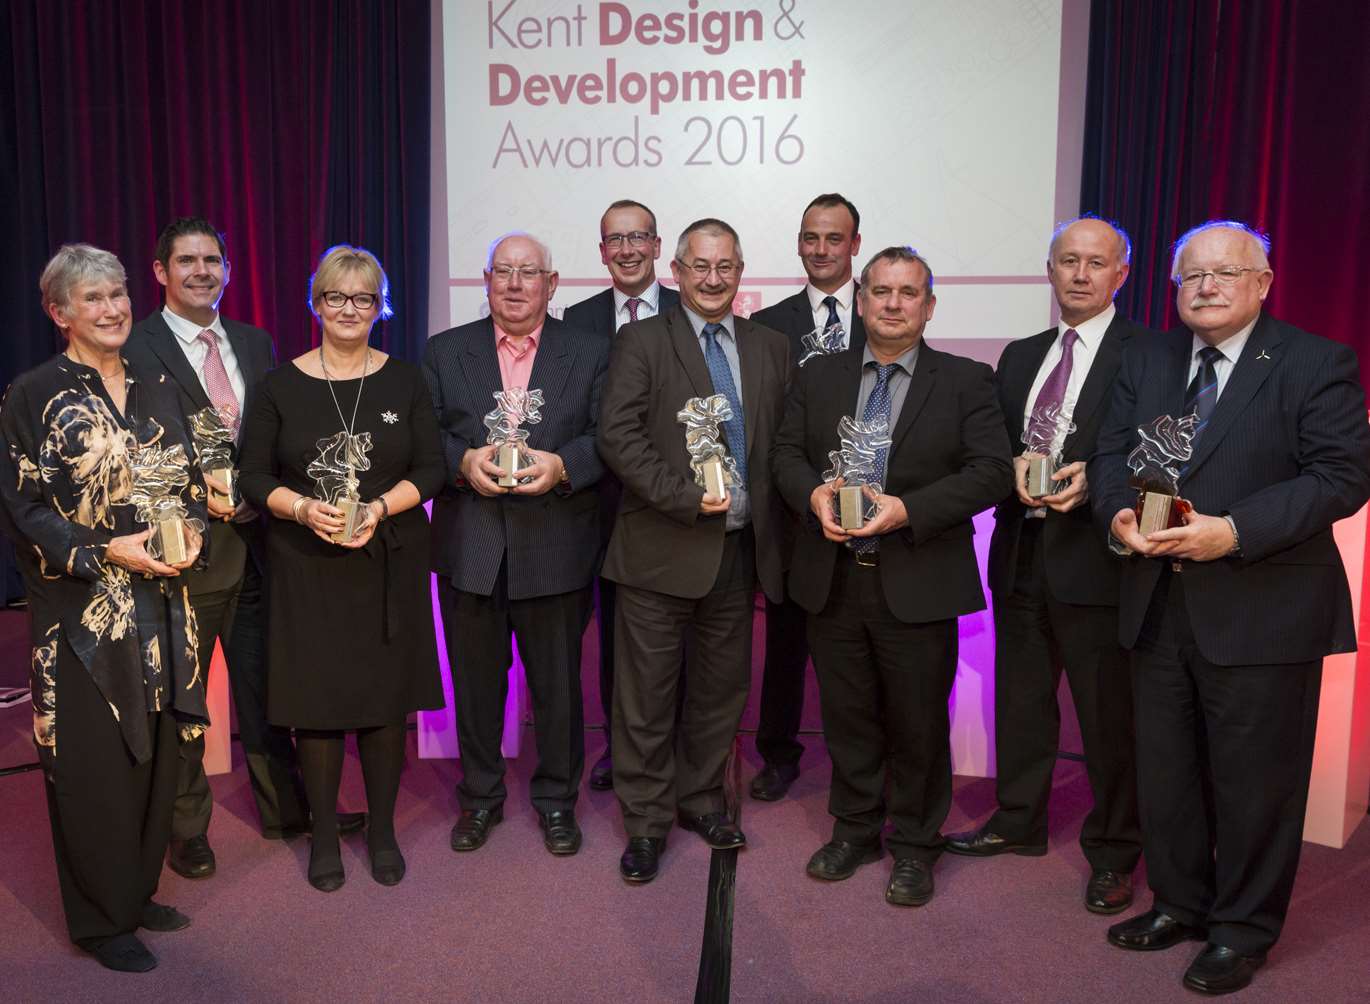 The winners at the Kent Design and Development Awards